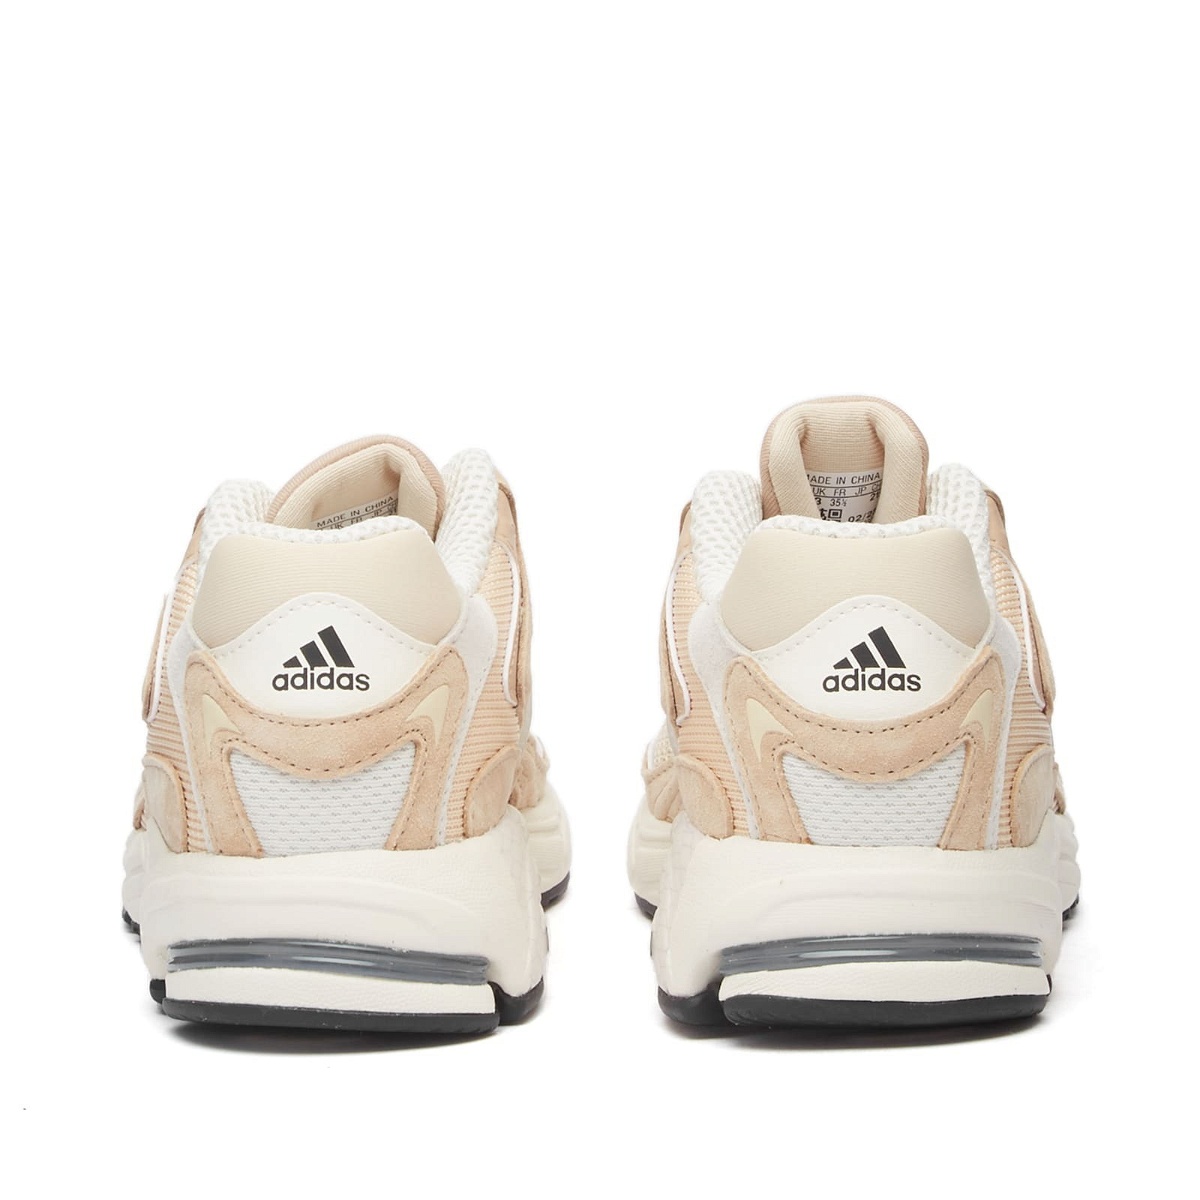 Response Sneakers Sand/Off CL Adidas adidas in White/Beige